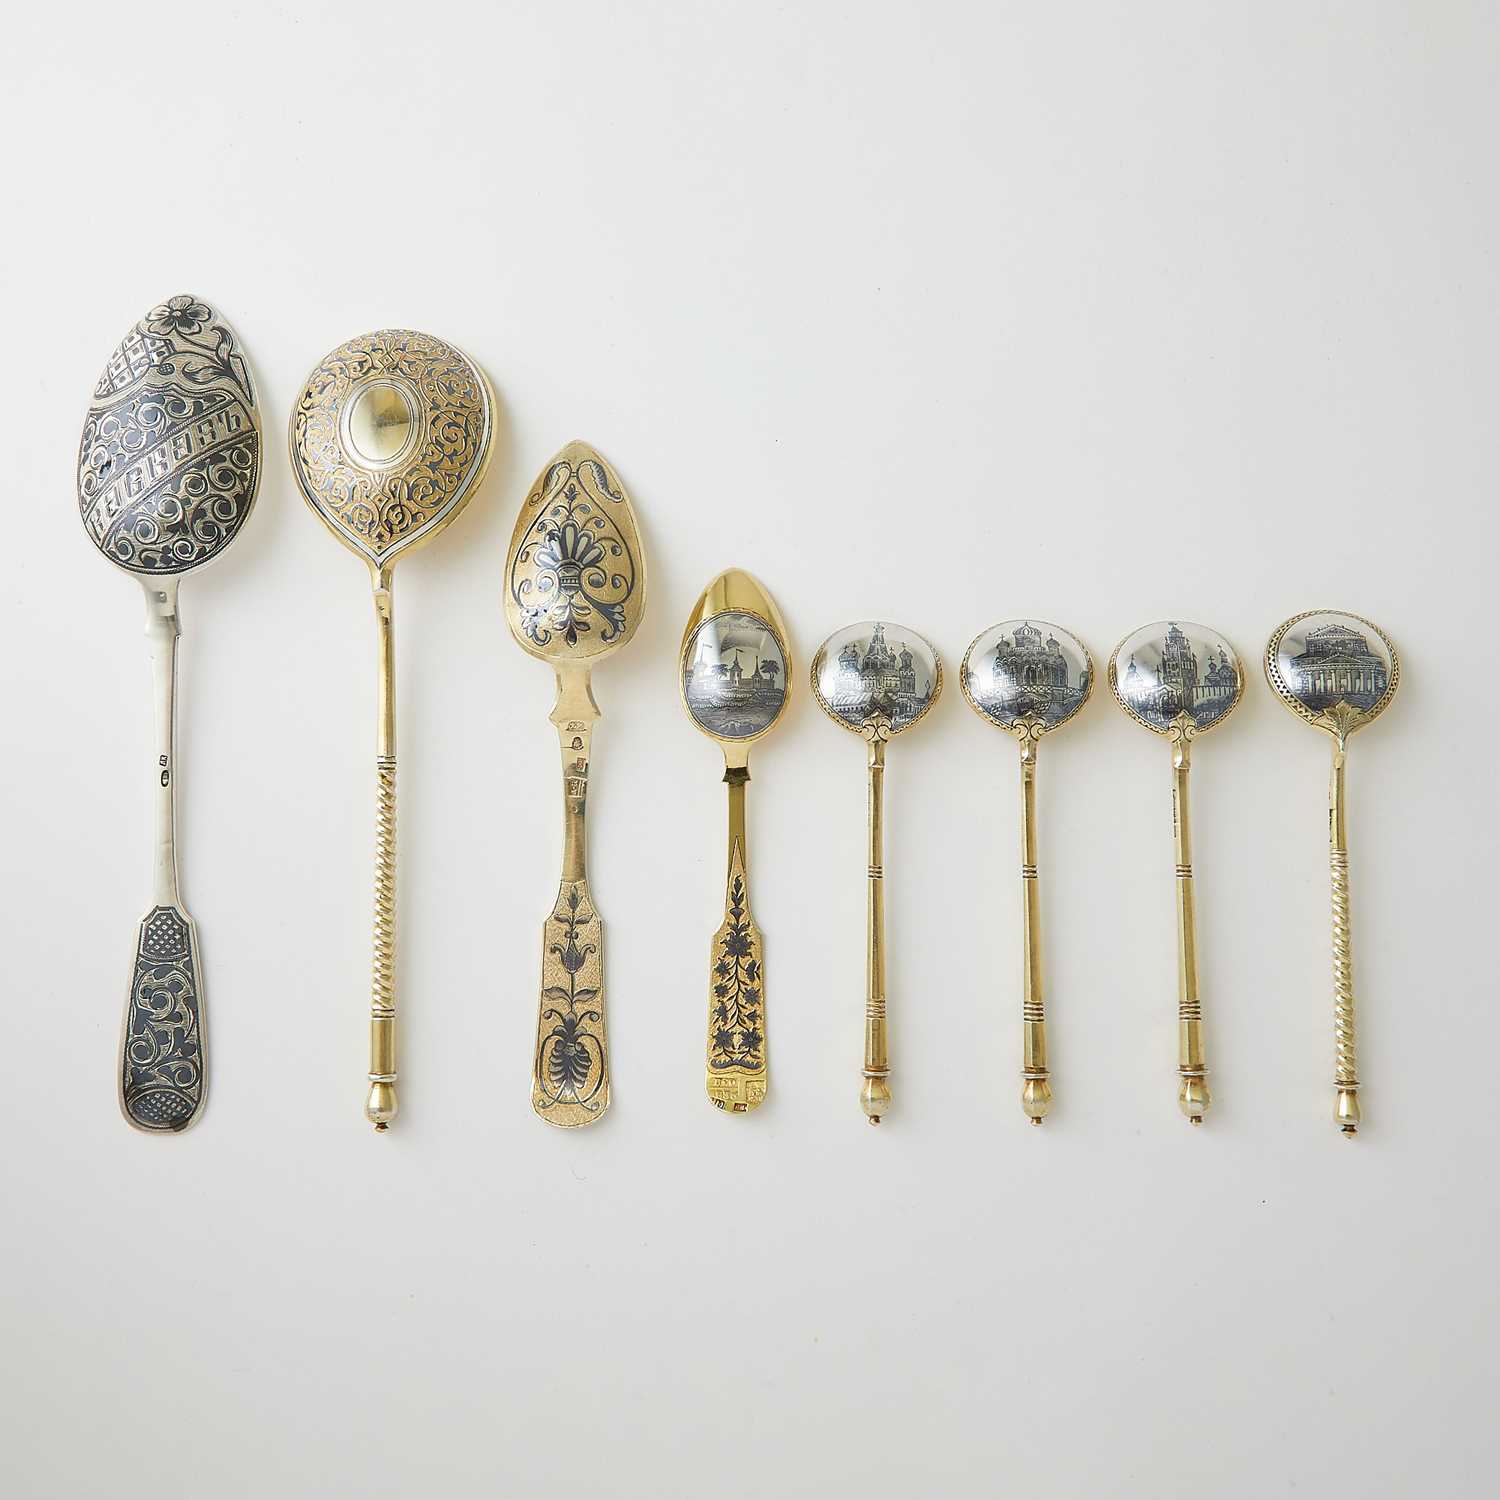 Lot 707 - Group of Eight Russian Silver, Silver-Gilt and Niello Spoons